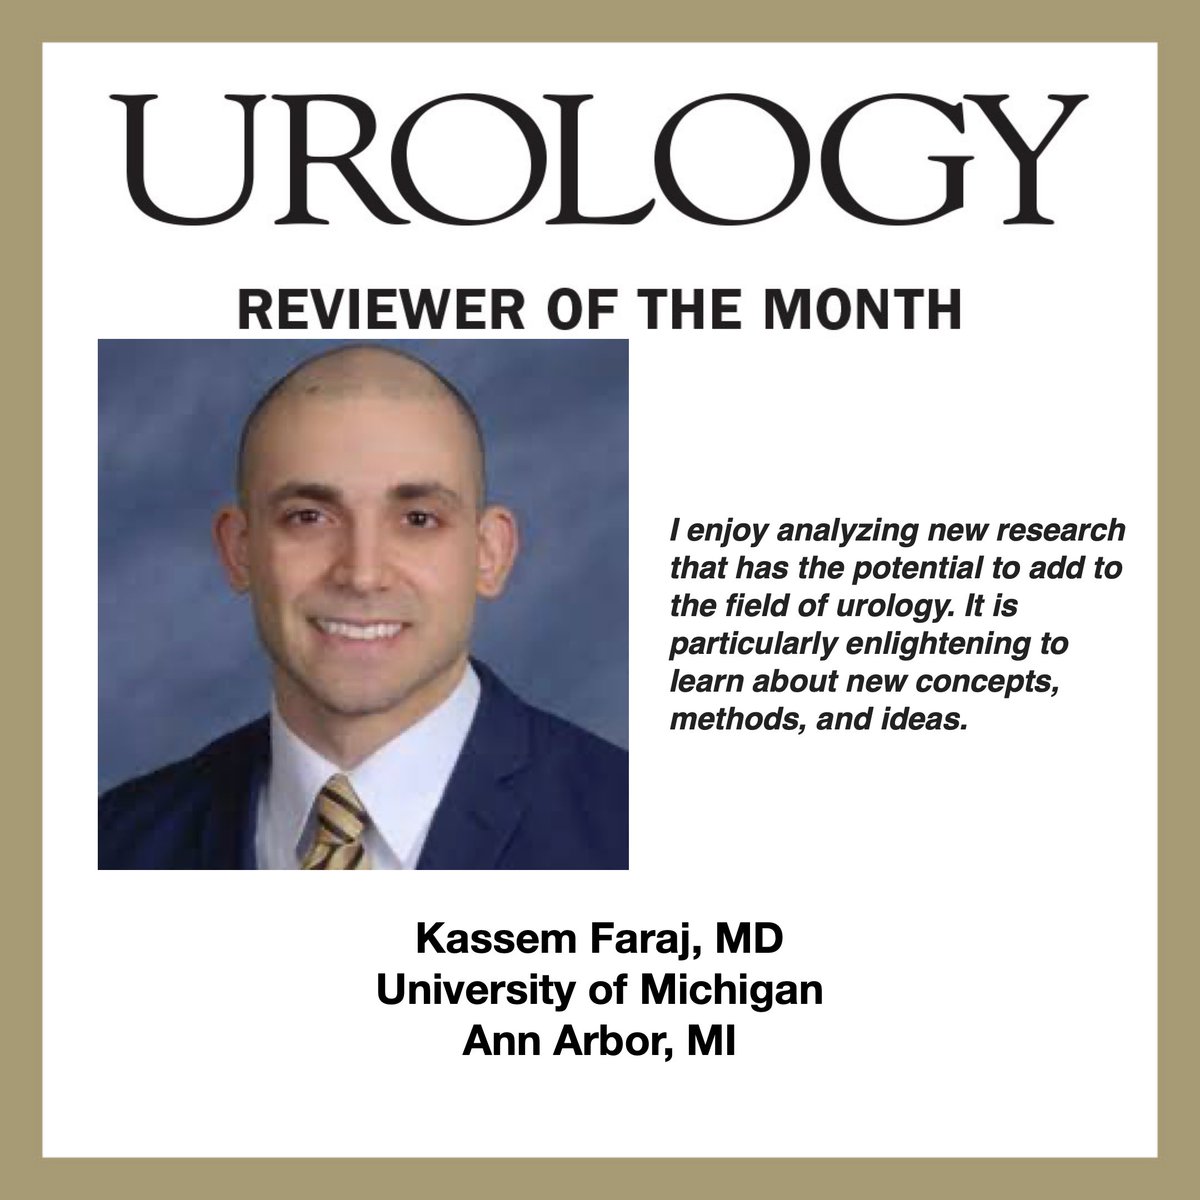 Introducing @kassemfarajmd: Dr. Faraj is currently in his second year of a three-year urologic oncology fellow @UMichUrology. After finishing fellowship, Dr. Farah is “striving for a urologic oncology practice with opportunities to study urologic cancer quality.” @SUO_YUO